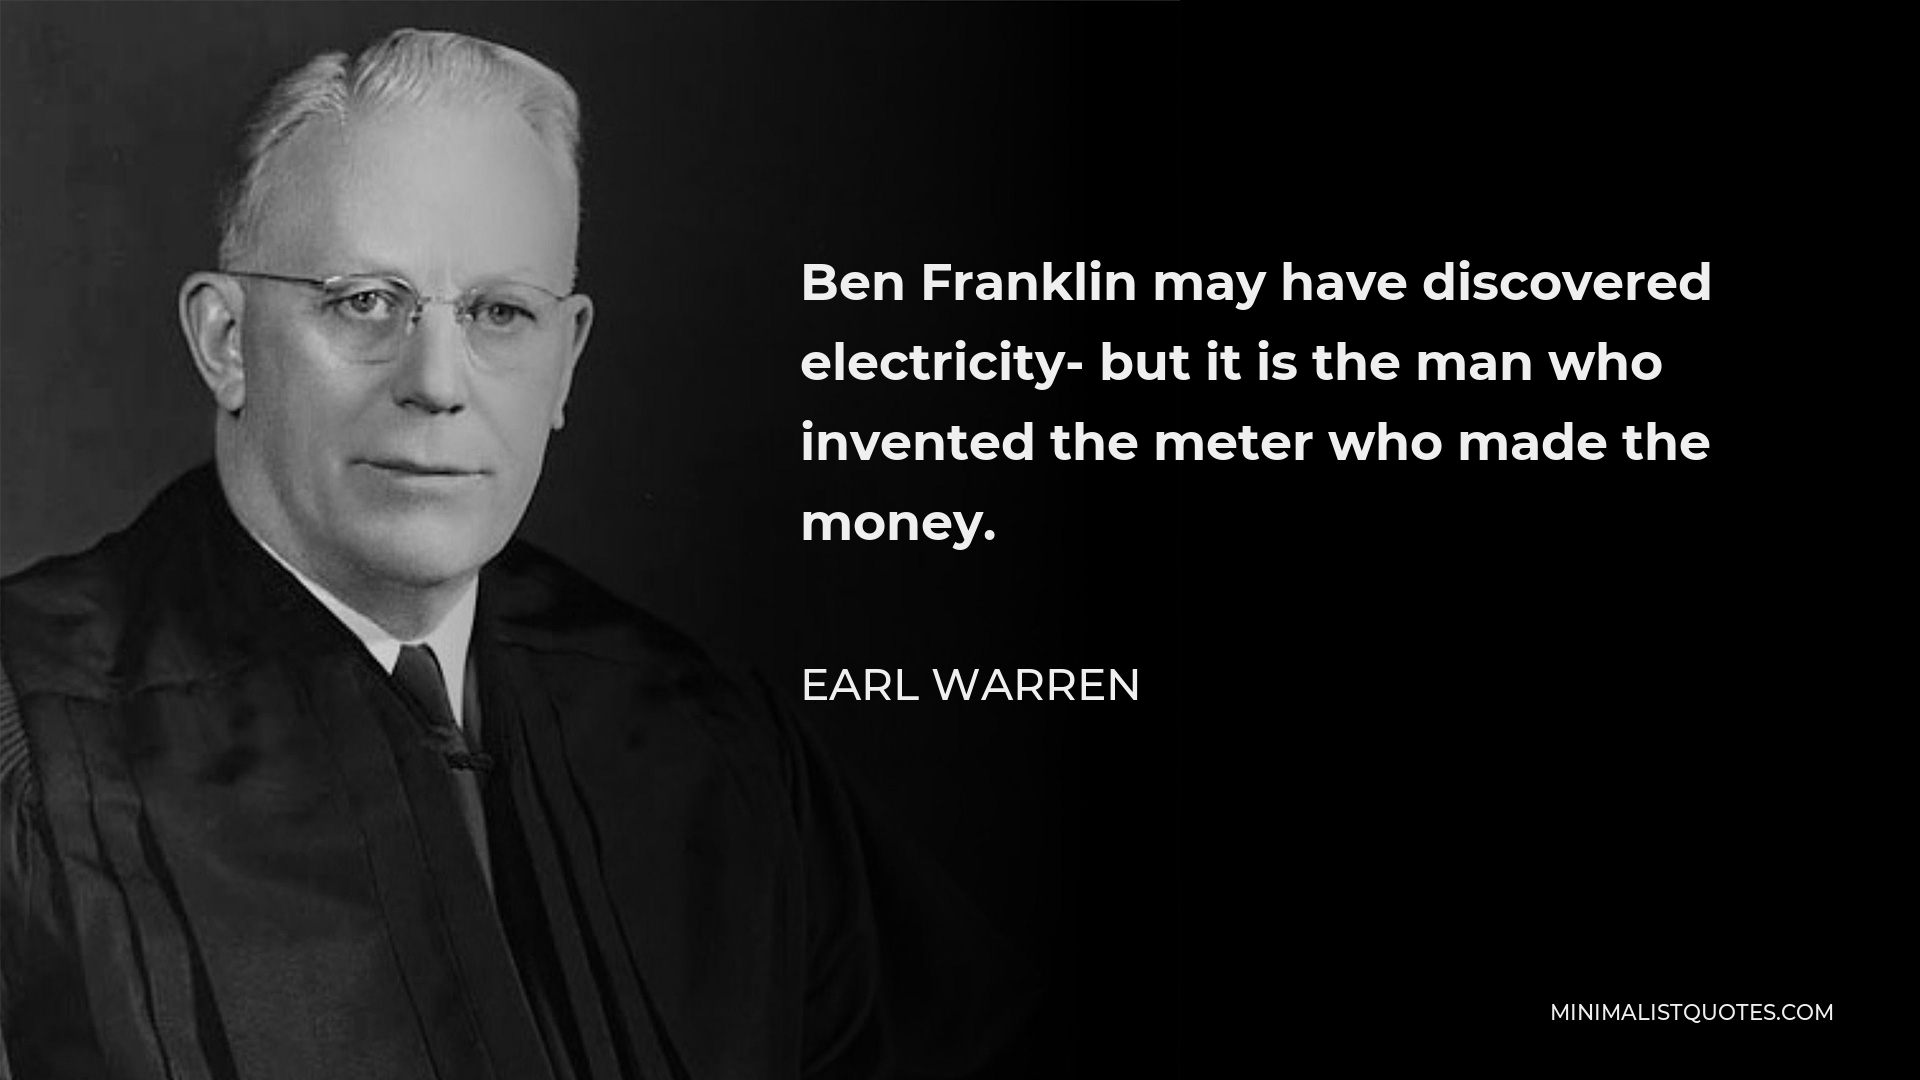 Earl Warren Quote - Ben Franklin may have discovered electricity- but it is the man who invented the meter who made the money.